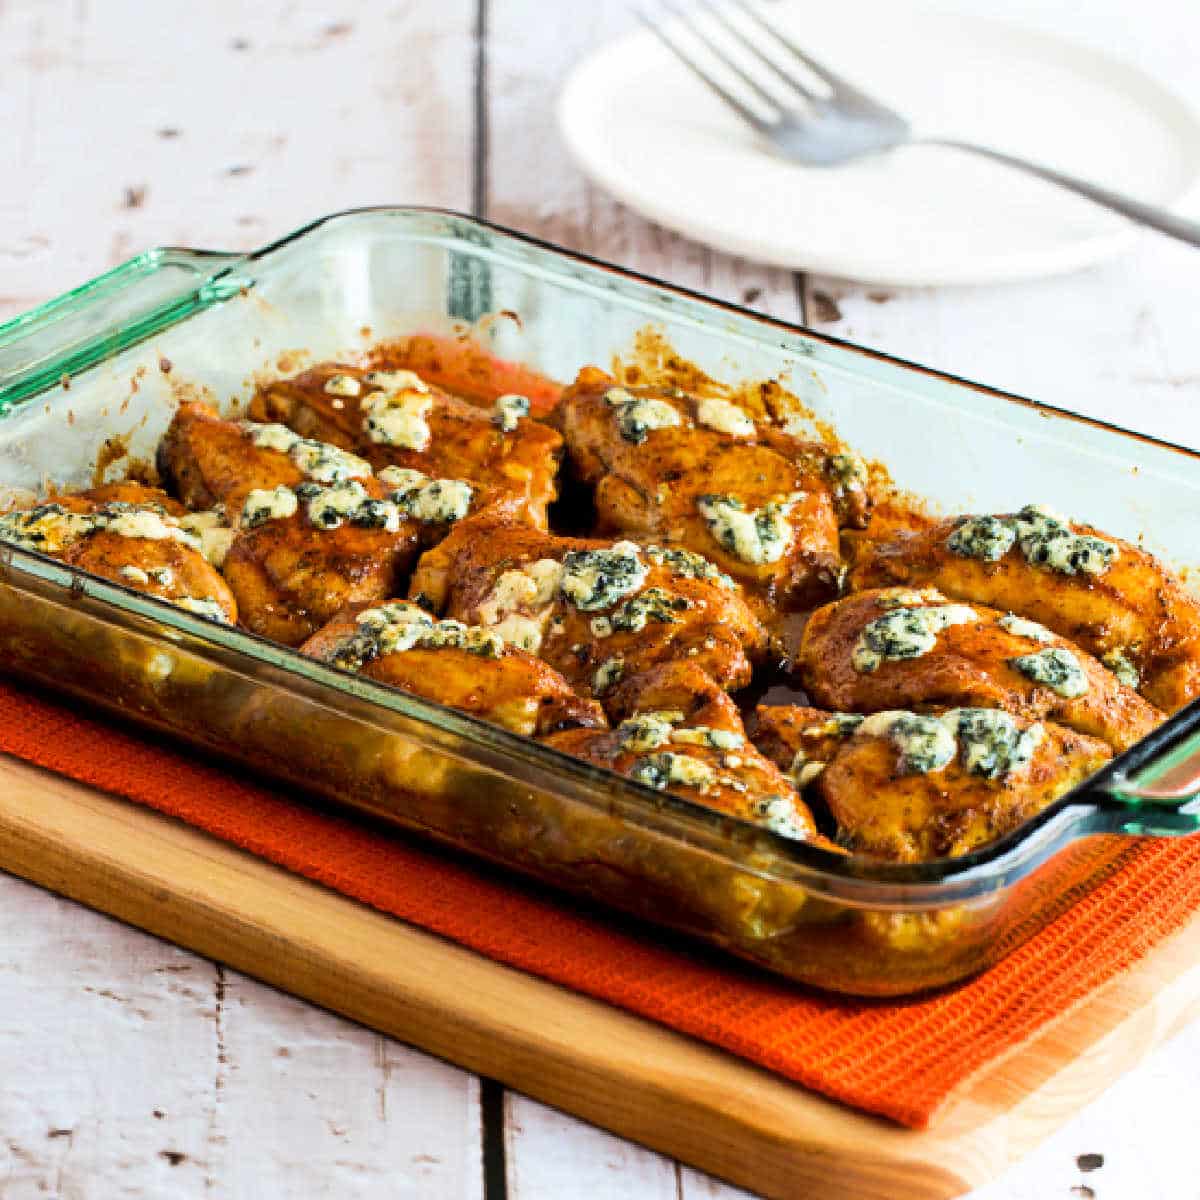 Square image of Baked Buffalo Chicken with Melted Blue Cheese shown in baking dish on cutting board.